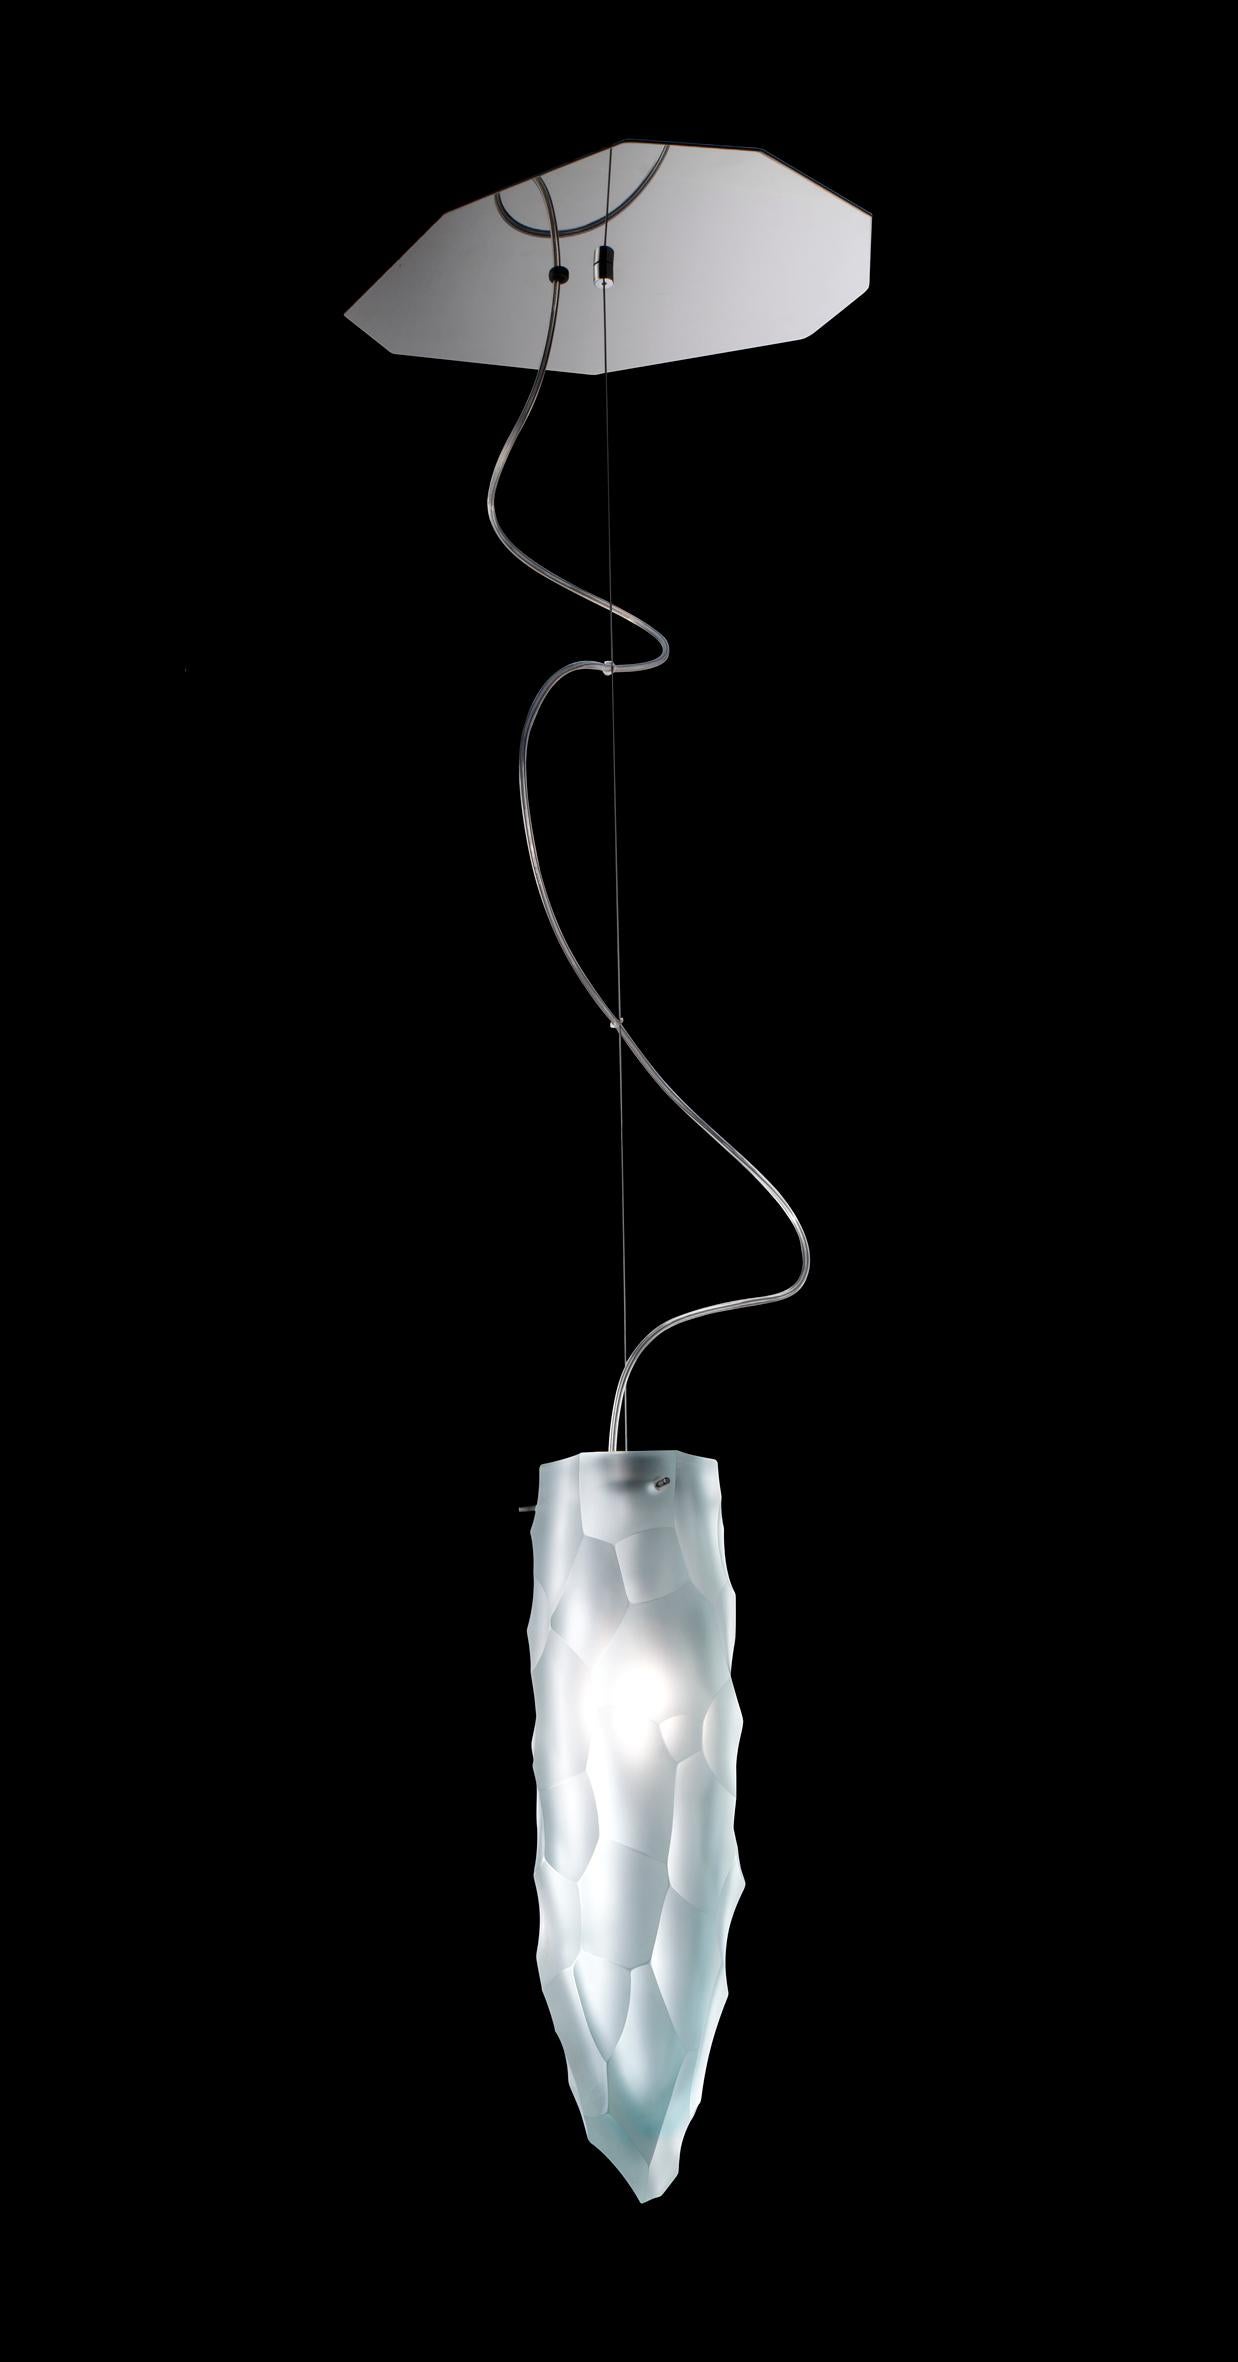 Siderale suspension lamp, designed by Giorgio Vigna and manufactured by Venini, features handmade blown and grinded glass cones. 